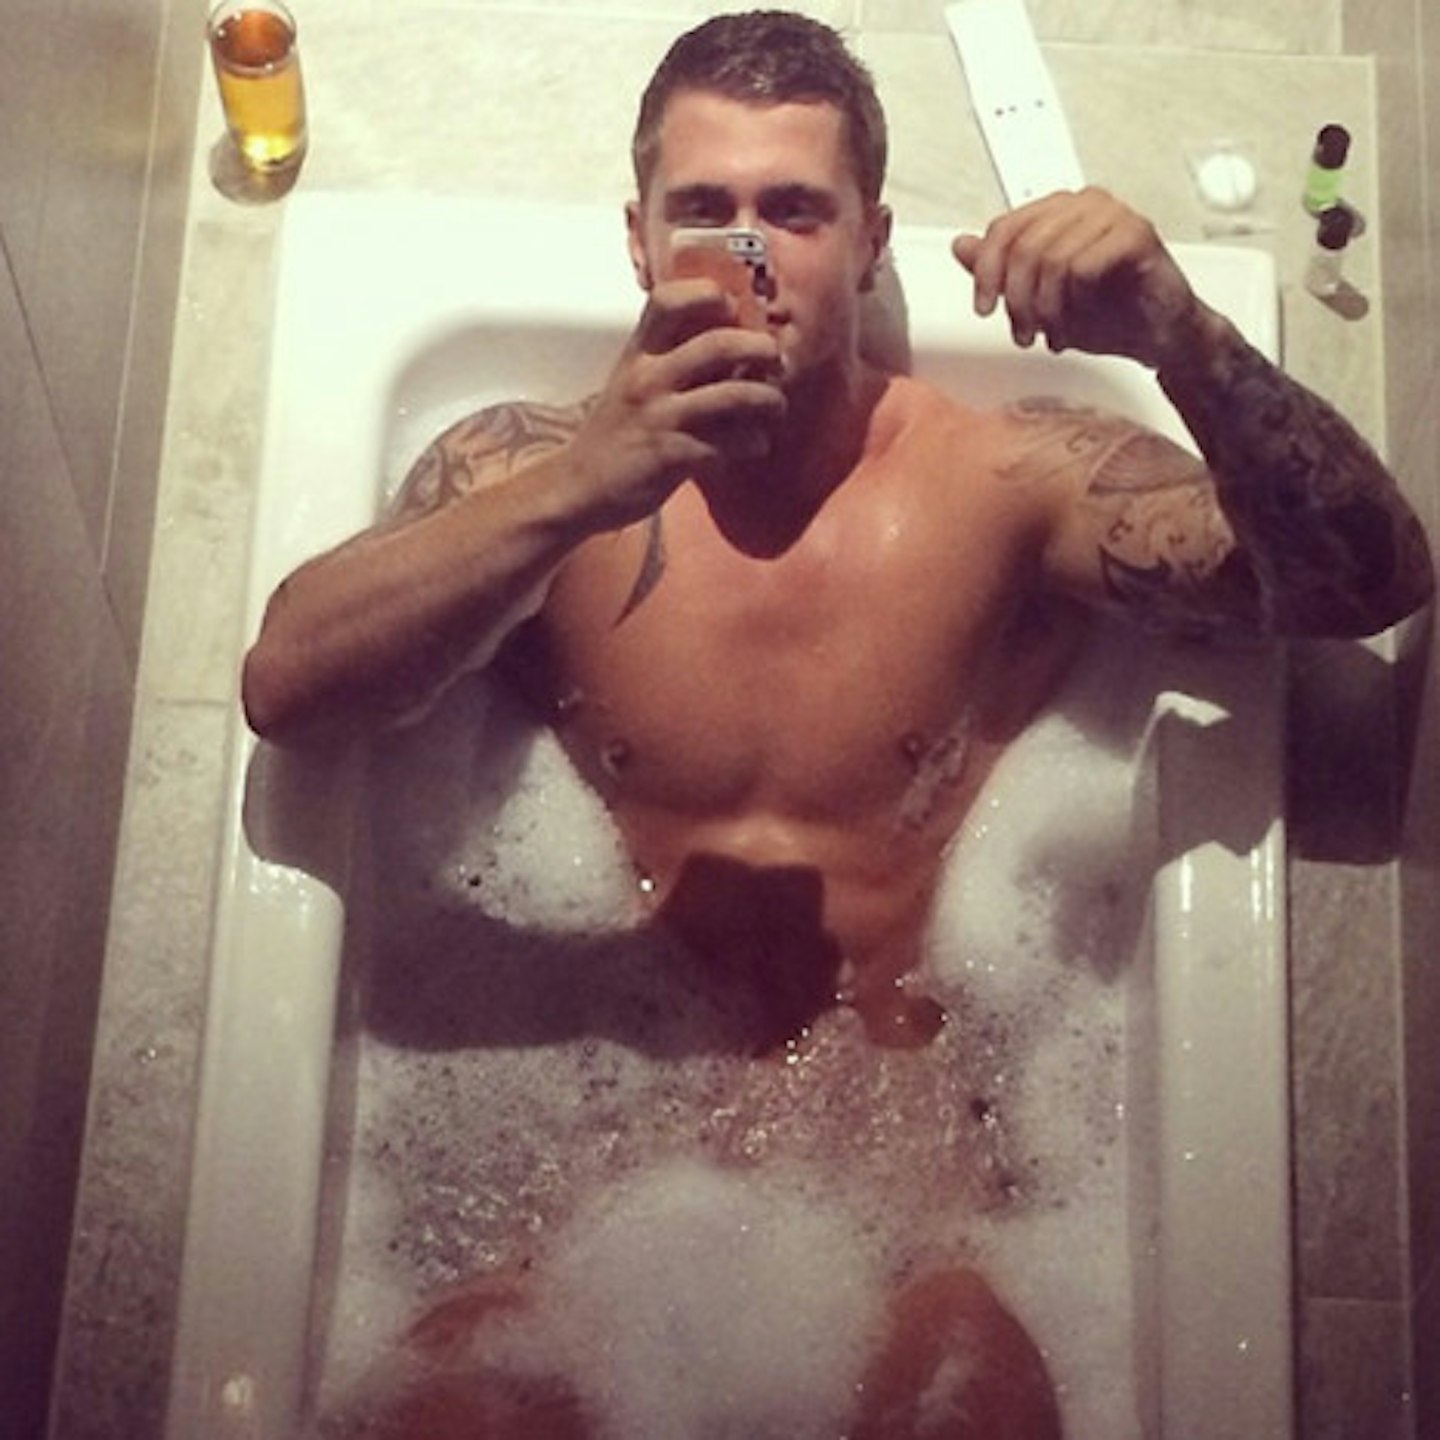 If they all look like this, we hope bath selfies become the next big thing